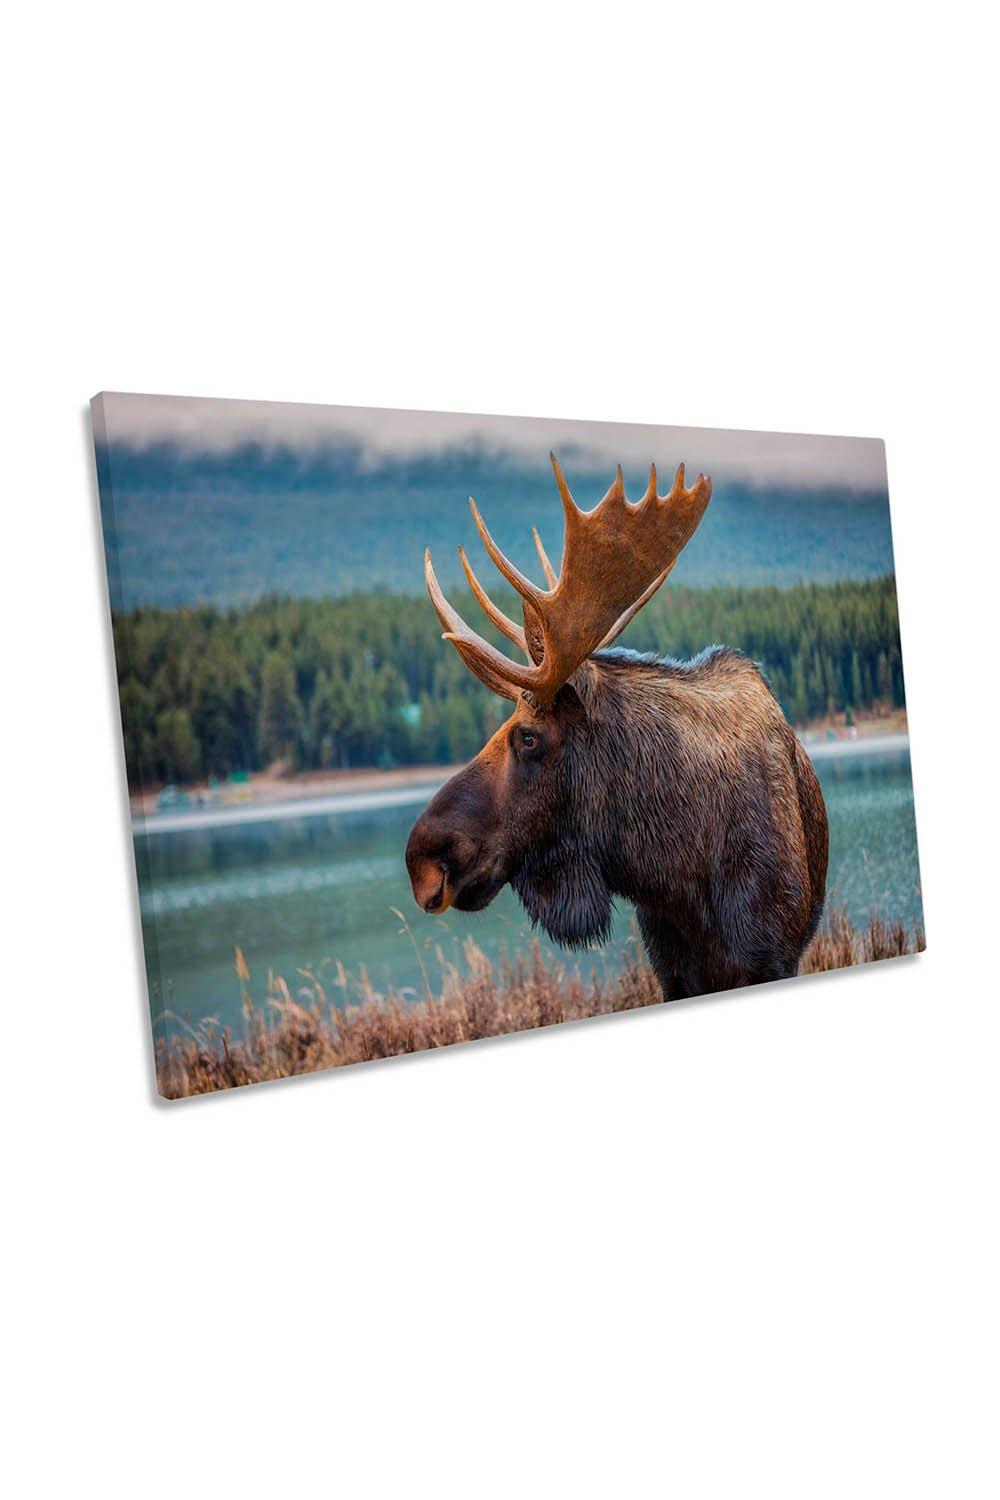 Canadian Moose Antlers Canvas Wall Art Picture Print